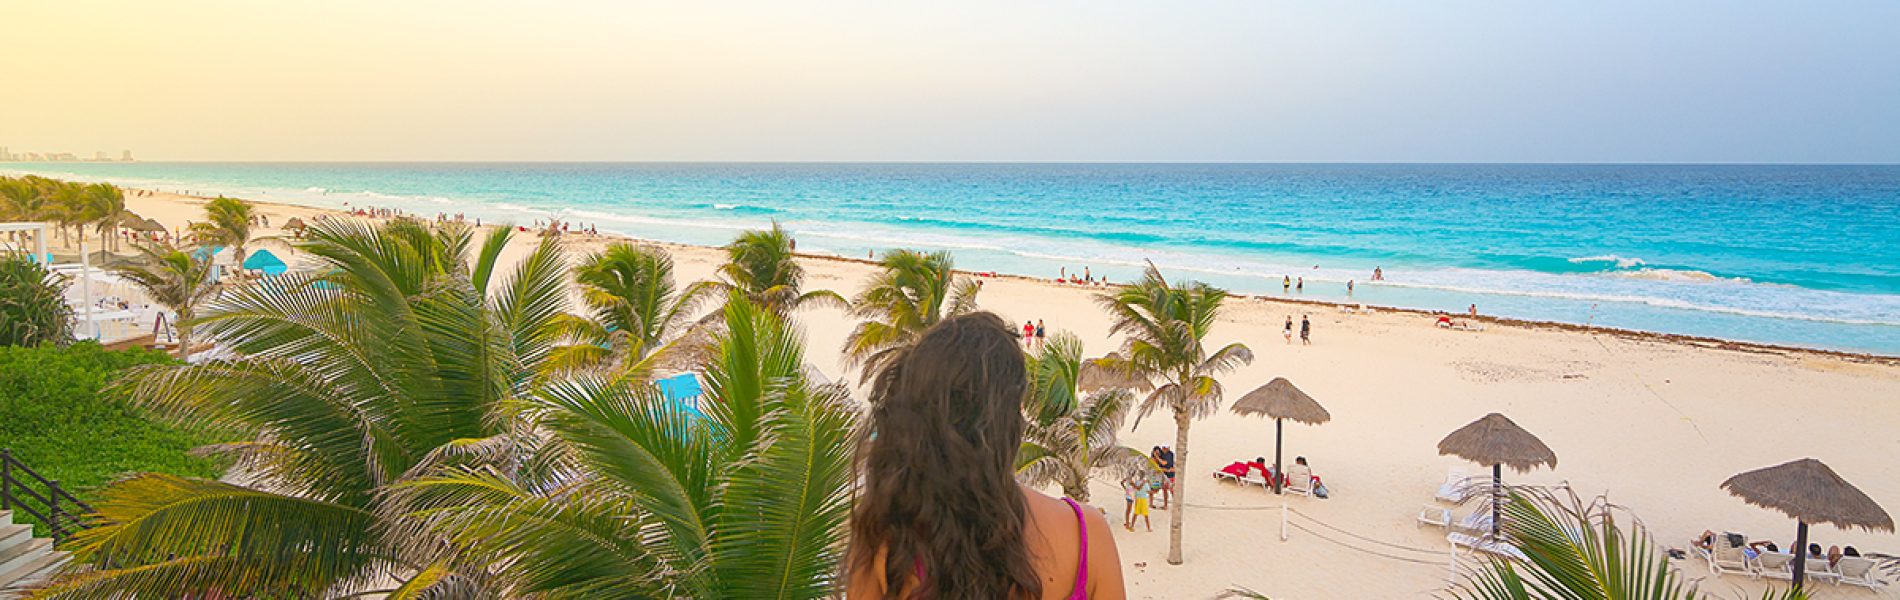 Young woman watching the beautiful Cancun beach at sunset, Mexic